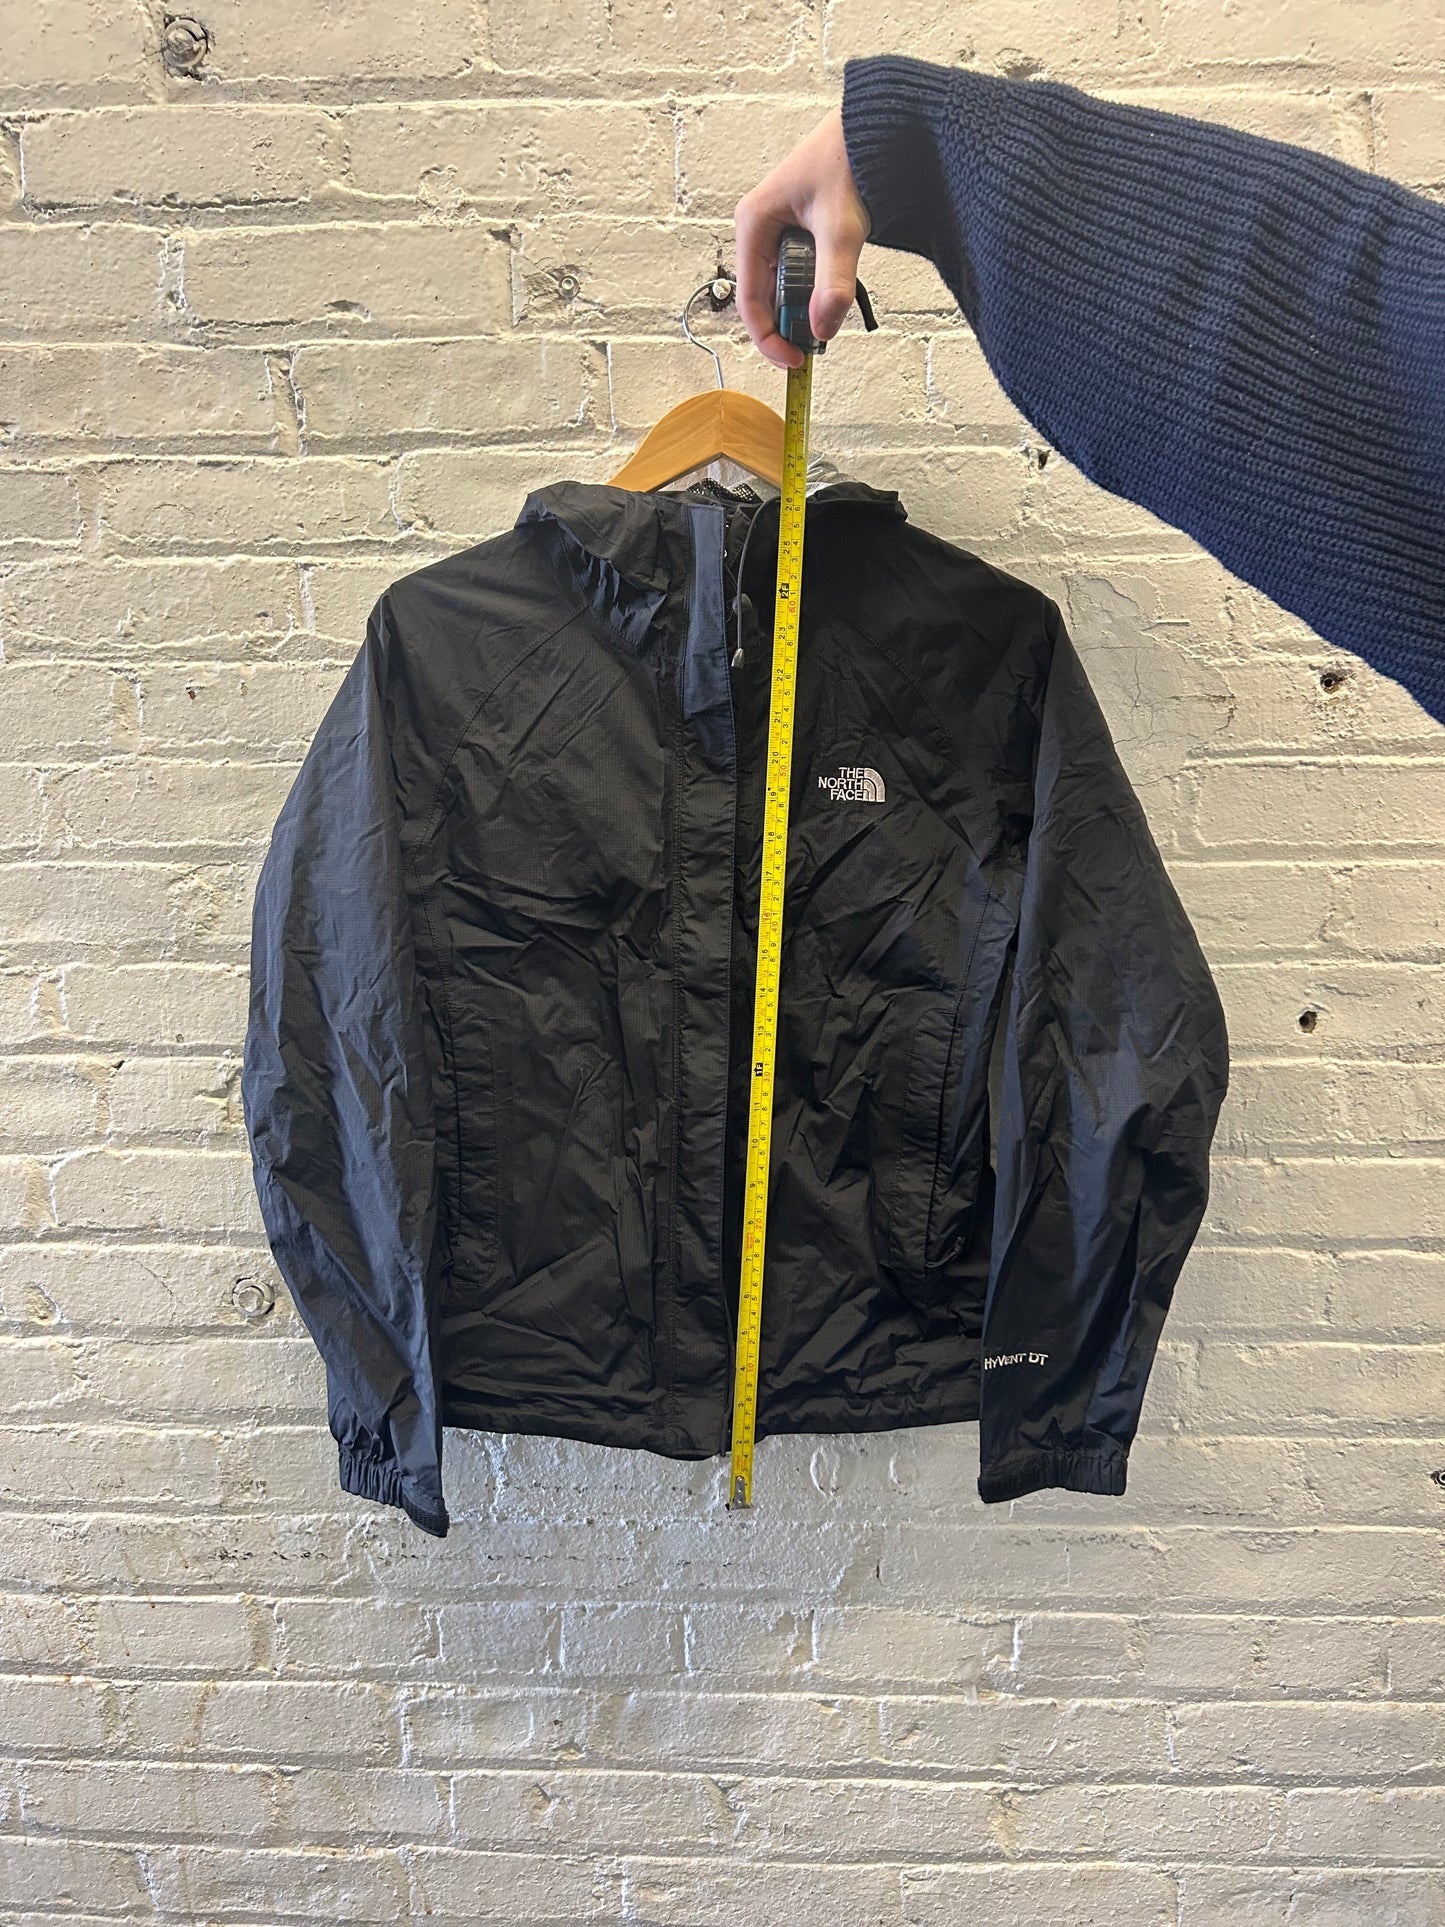 The North Face Hyvent Jacket - XS/Small